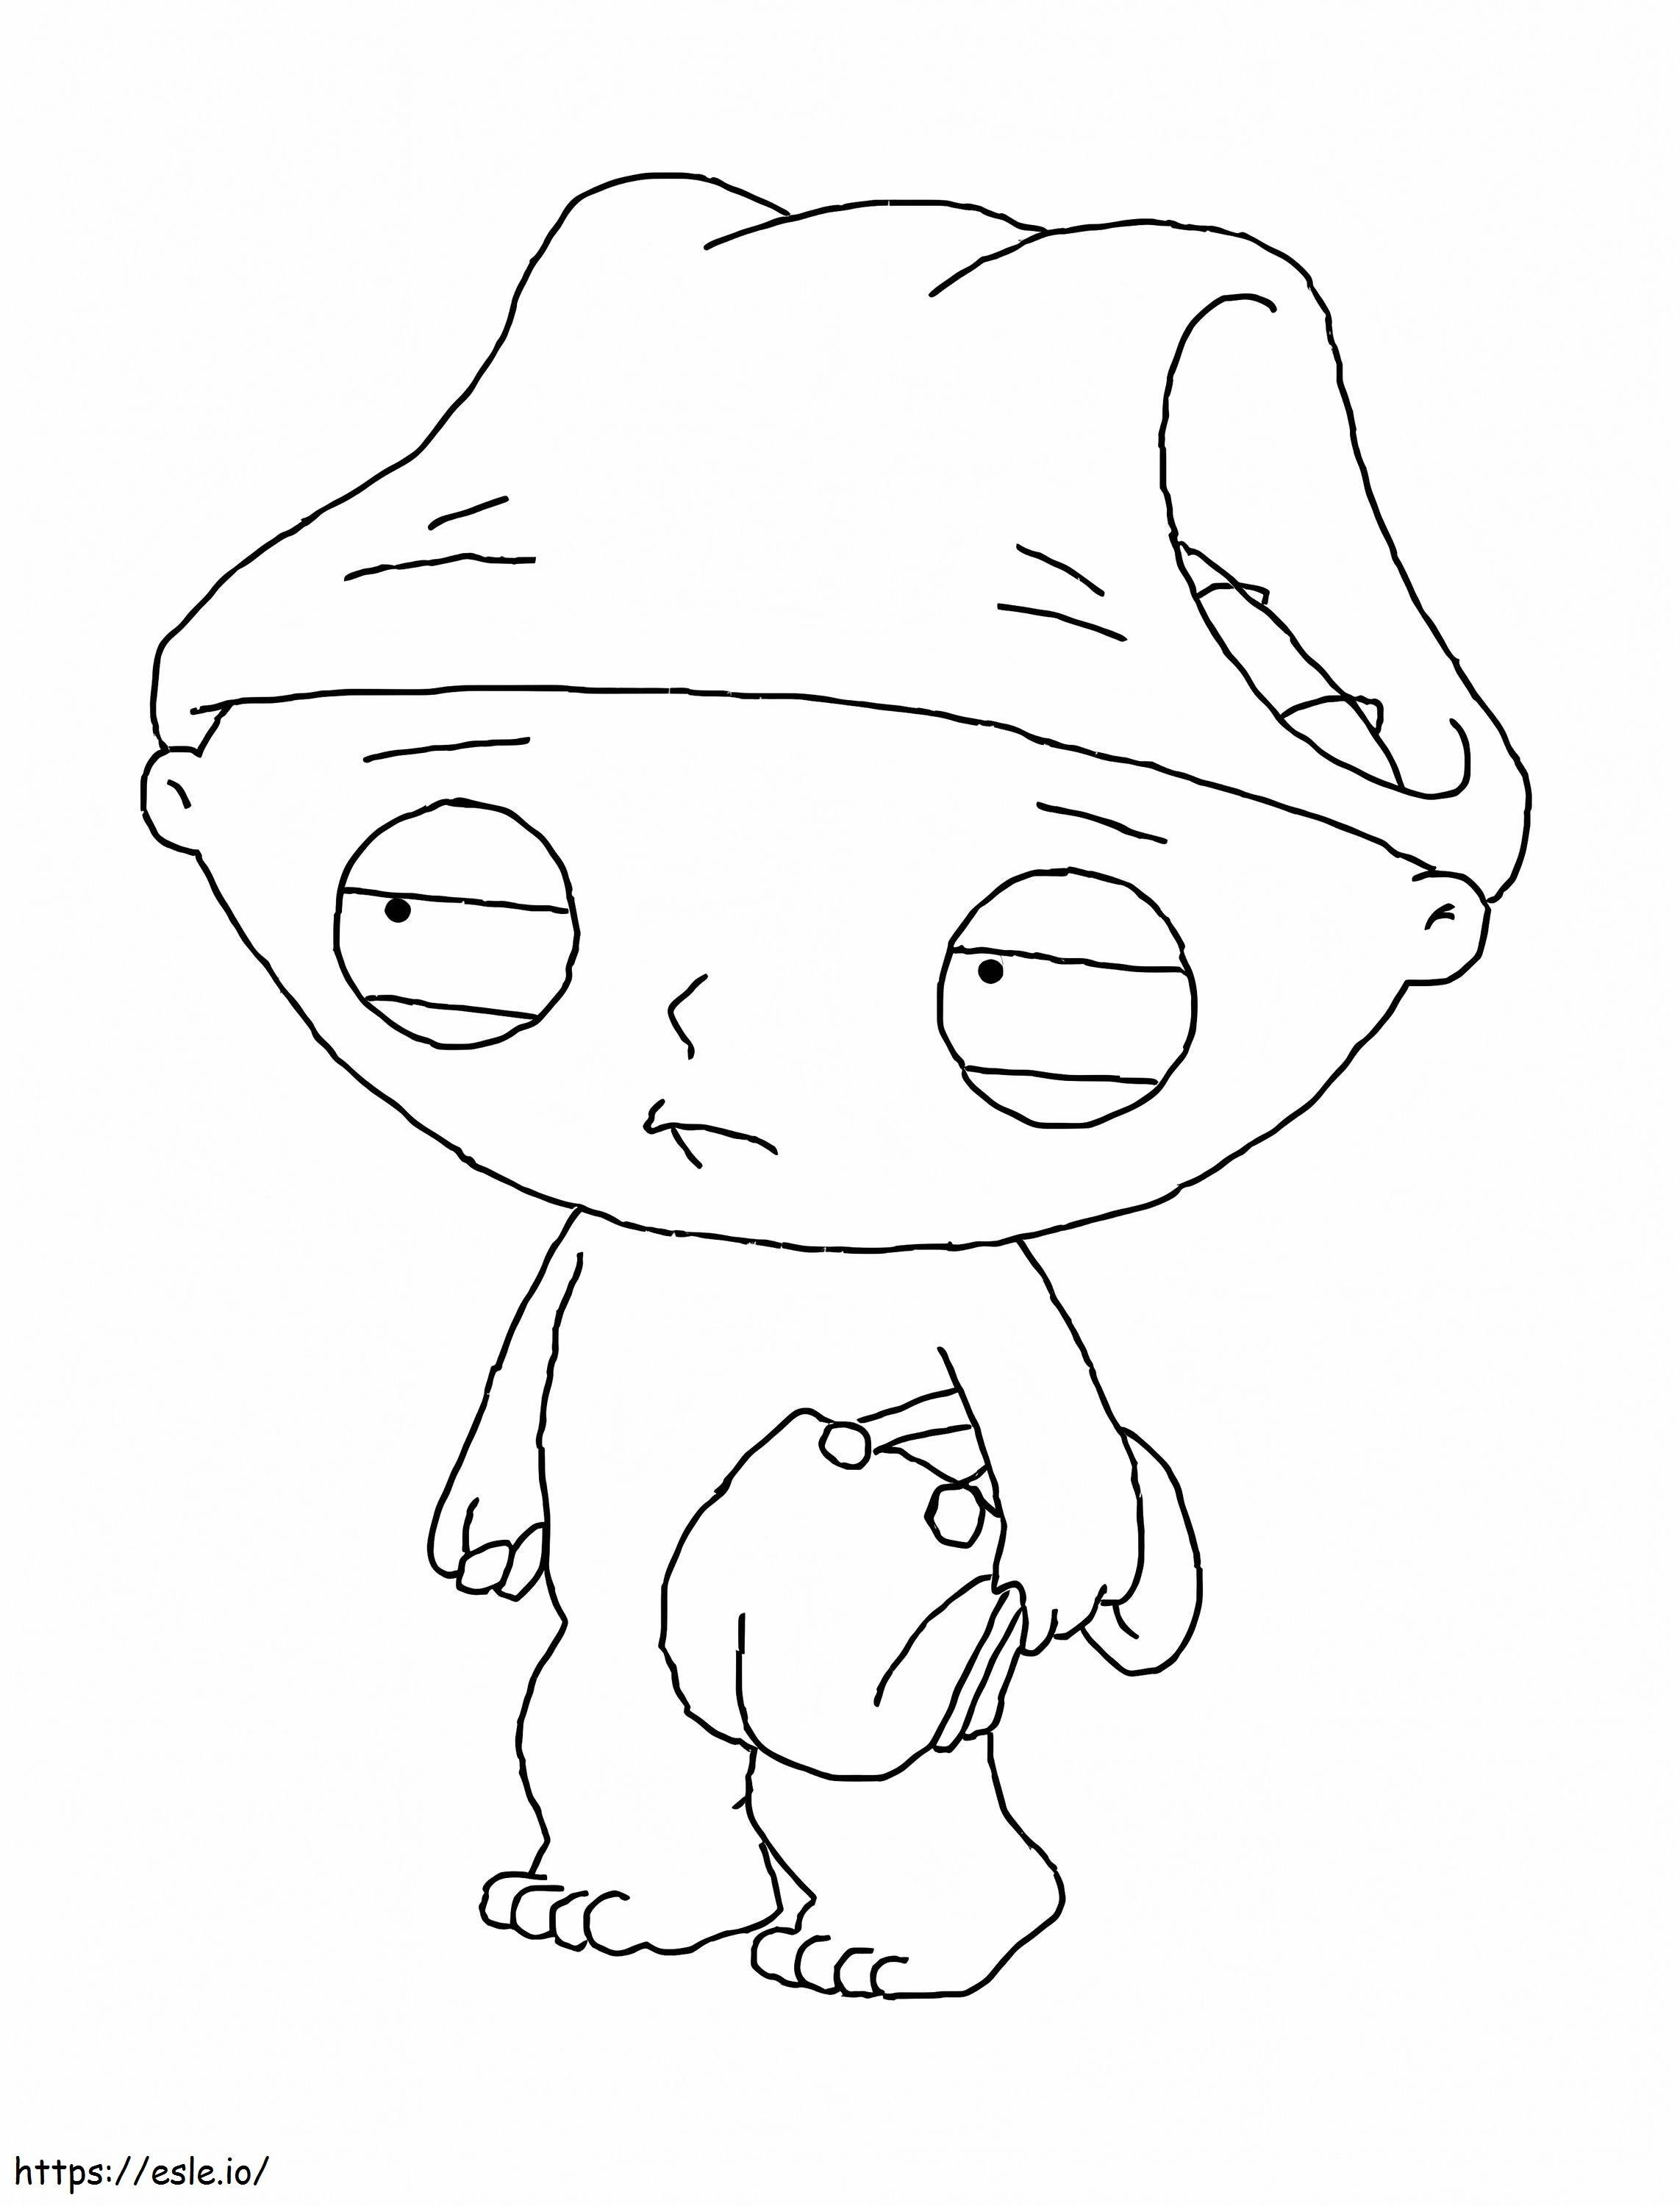 Stewie Soñoliento coloring page